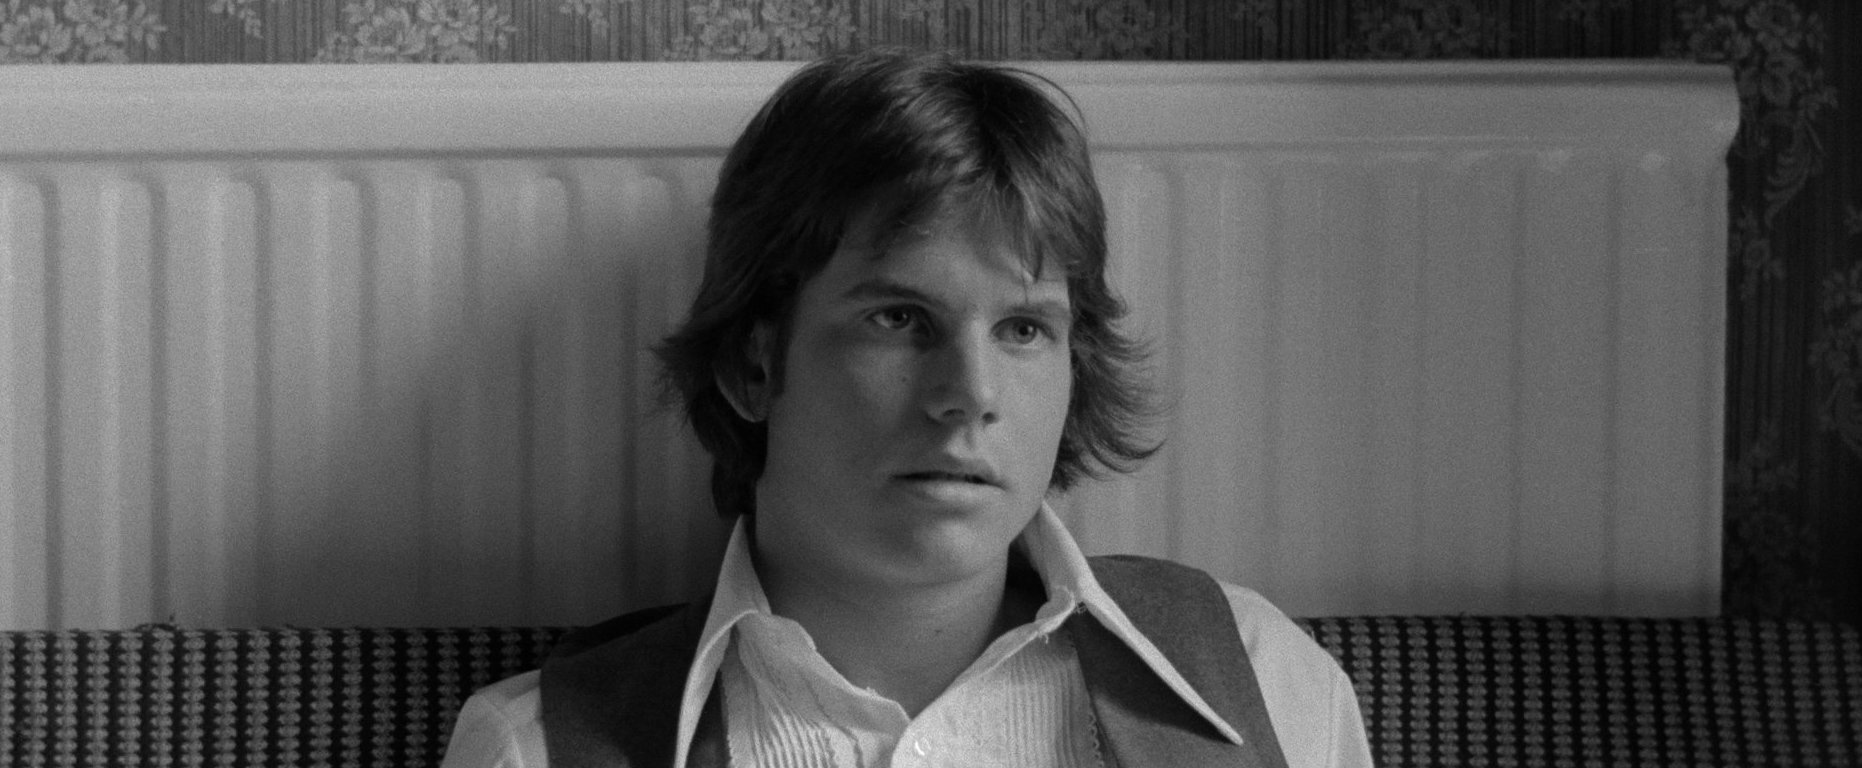 Bill Paxton sitting against a wall, mouth agape in the black-and-white film Taking Tiger Mountain